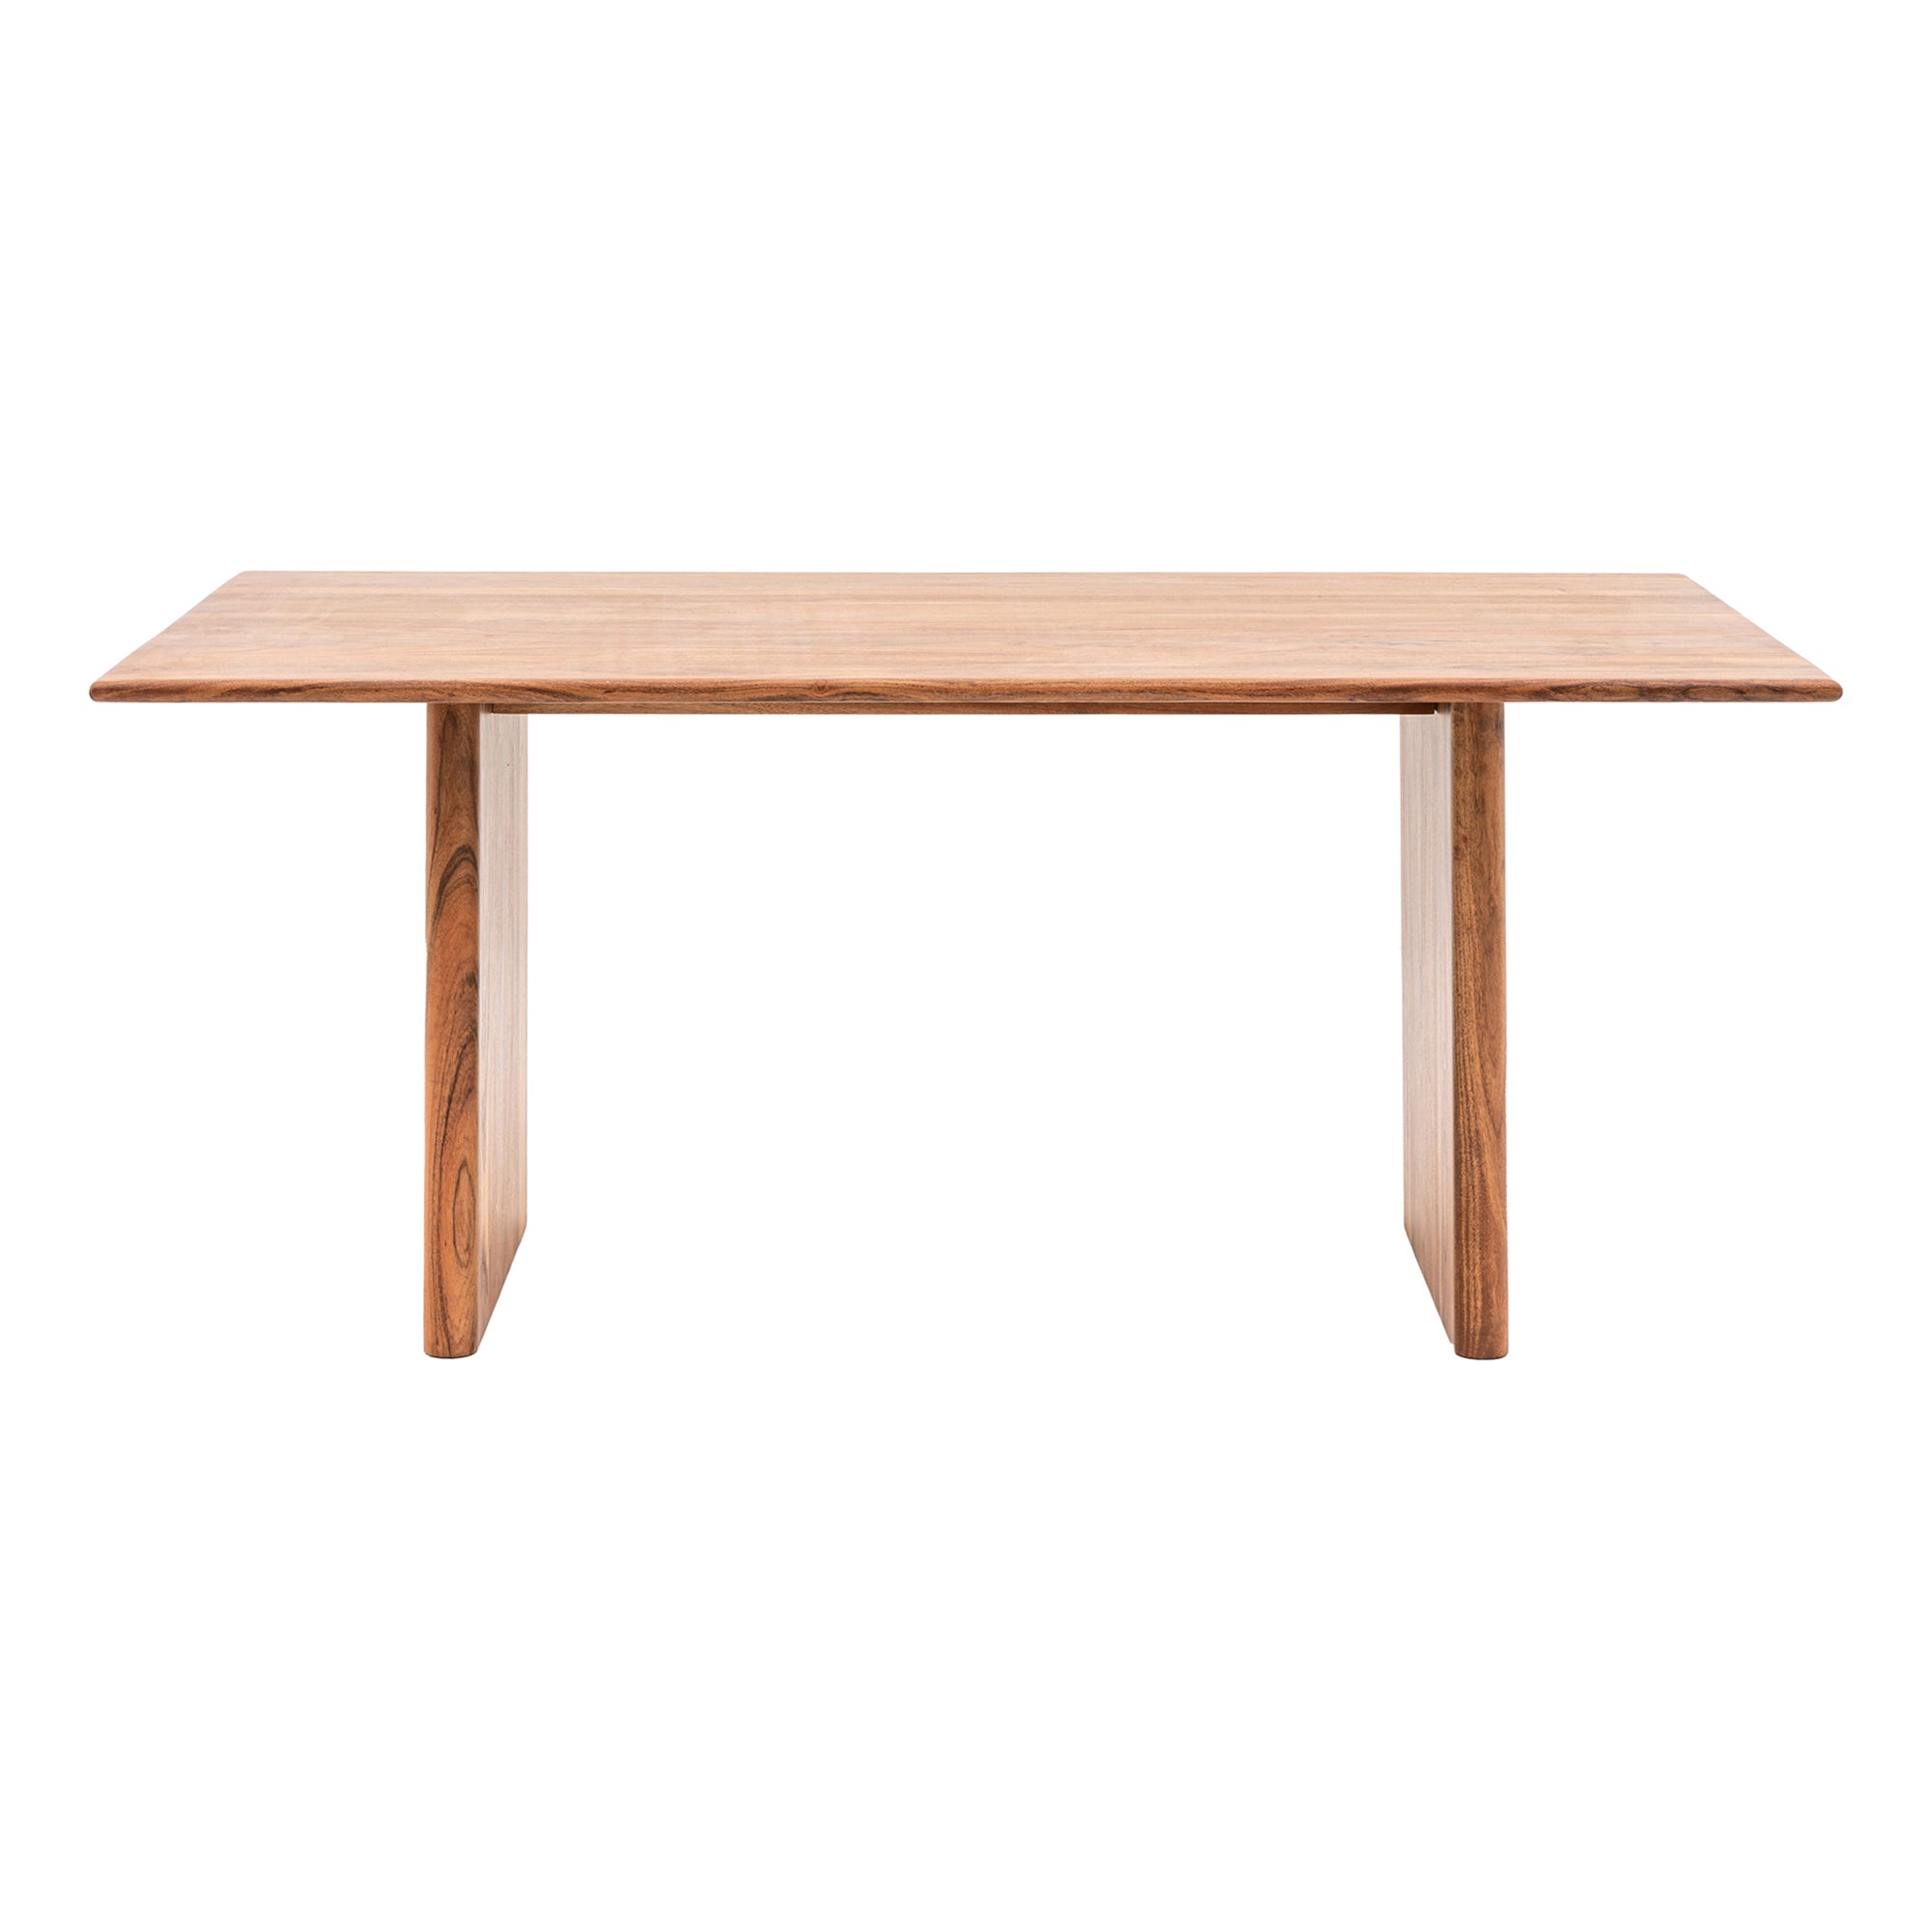 The Contemporary Rectangle Dining Table